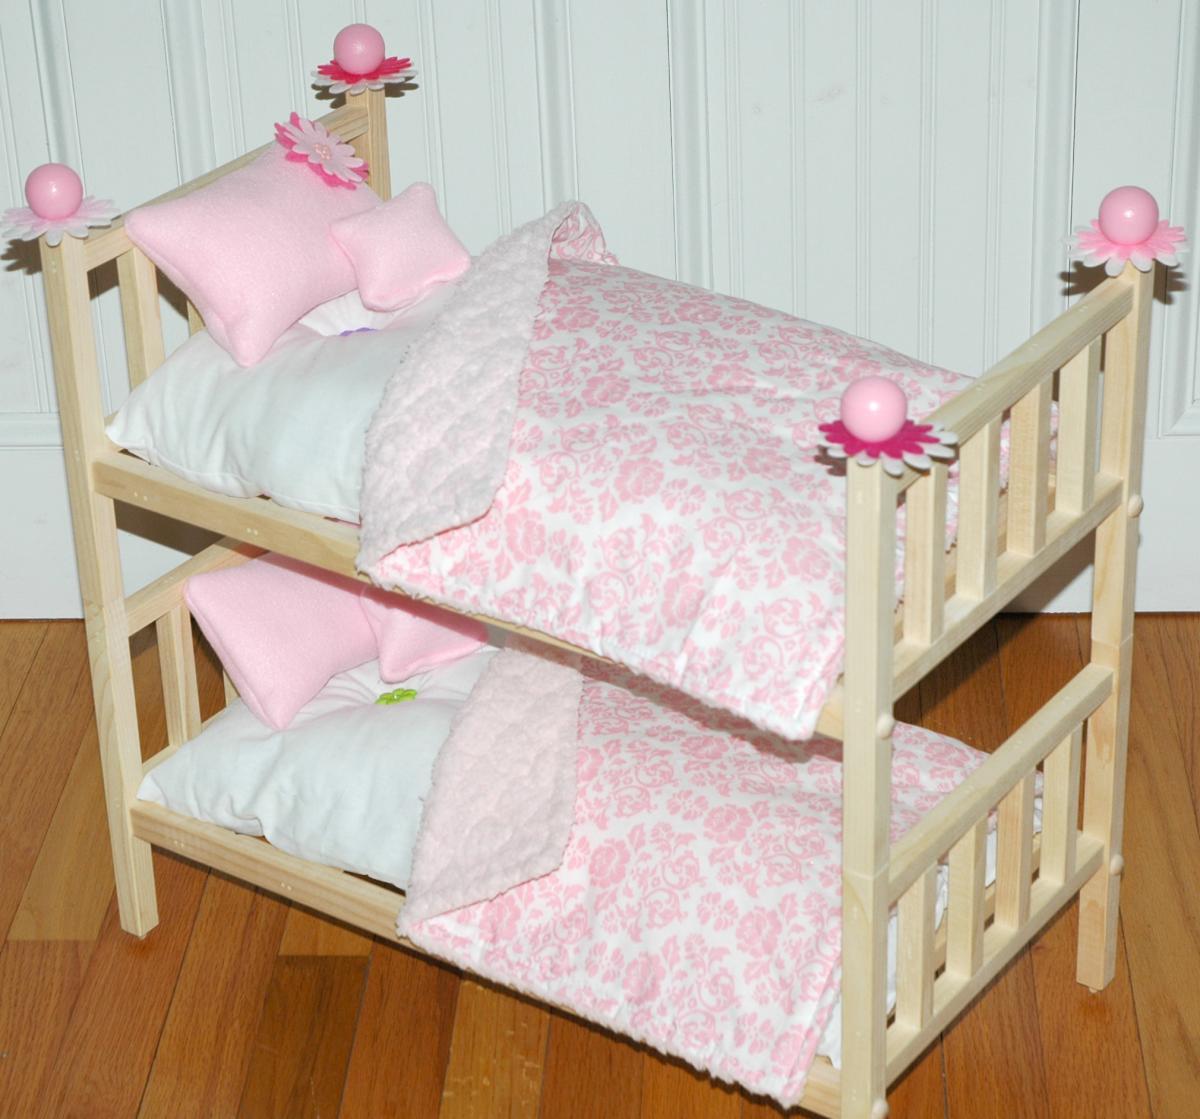 American Girl Doll Bed - Doll Bunk Bed Perfectly Pink - Fits American Girl Doll And 18 Inch Dolls